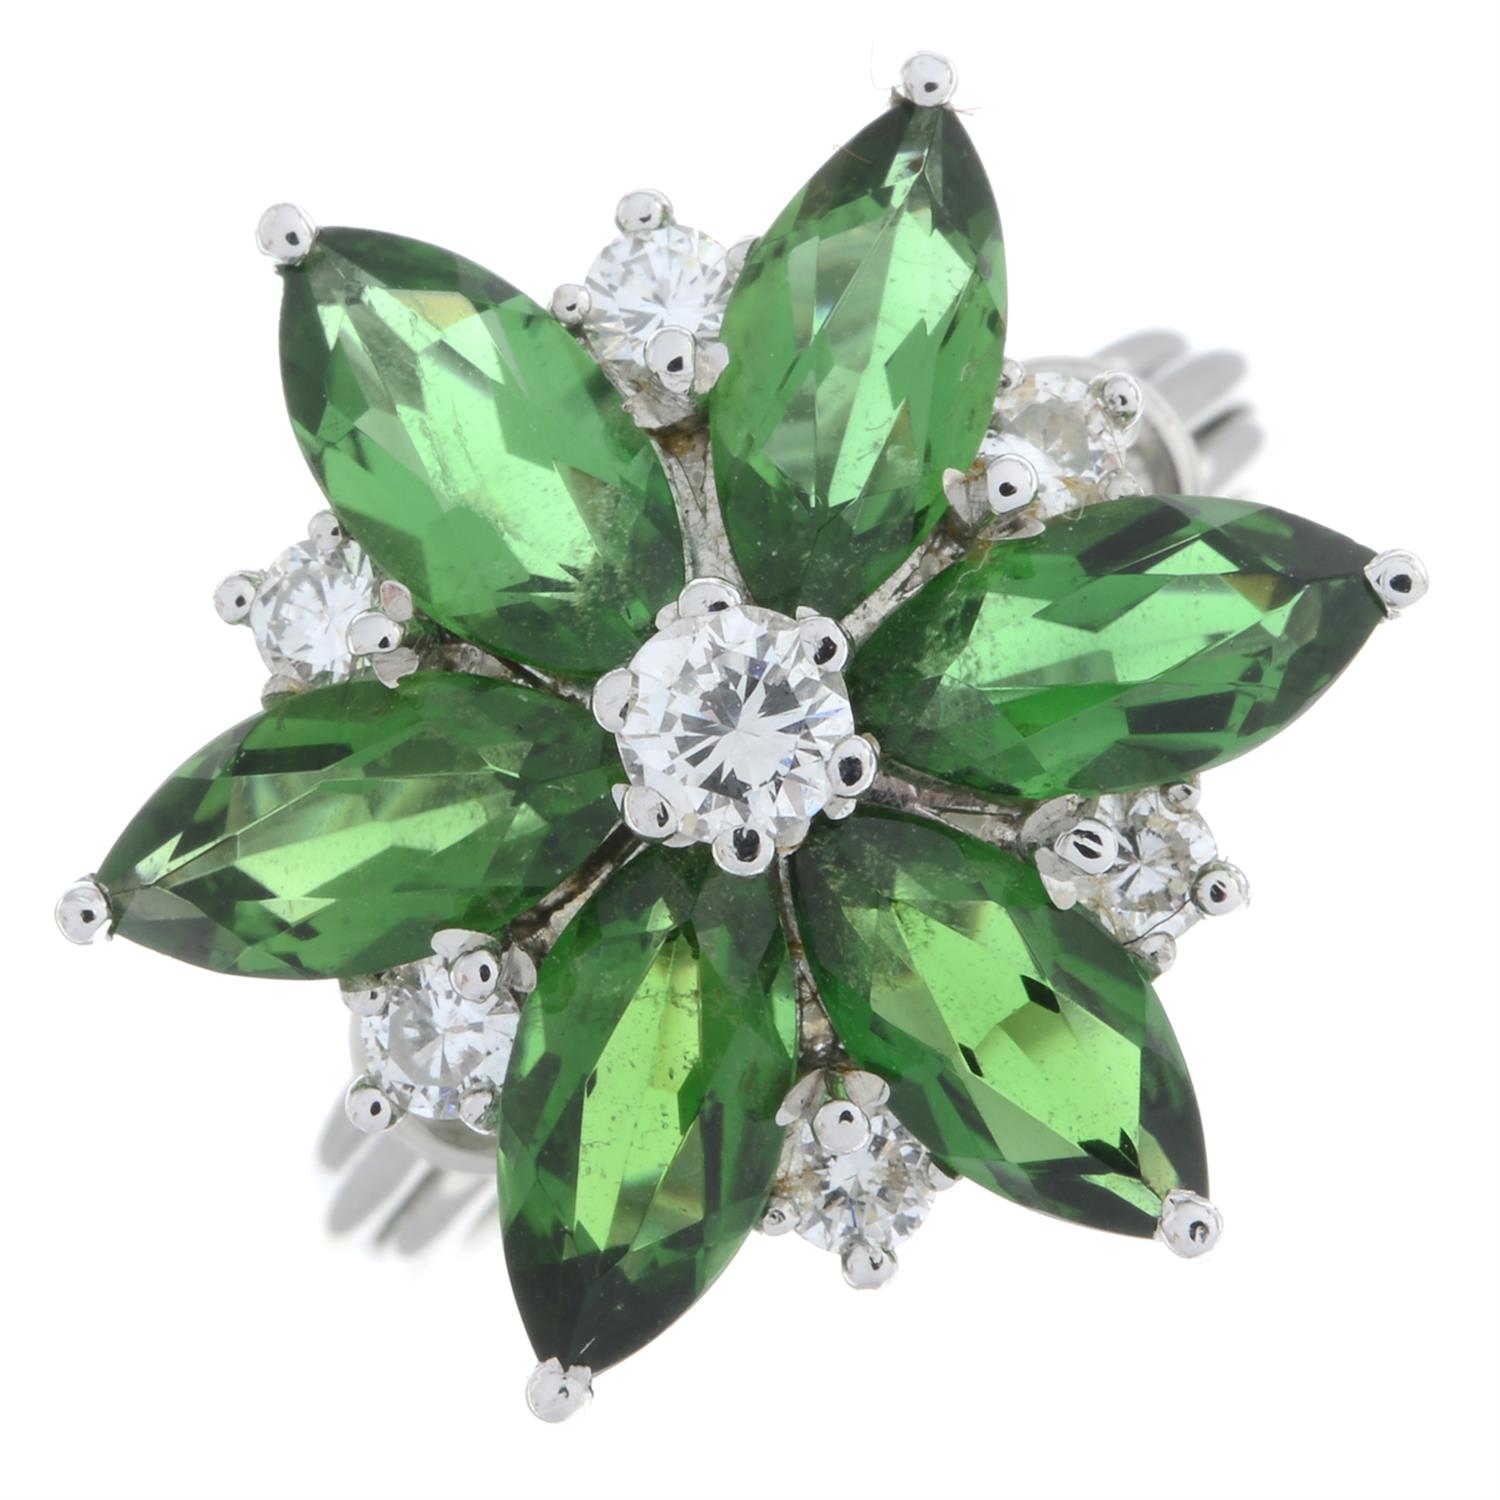 Diamond and green gem floral cluster ring - Image 2 of 5